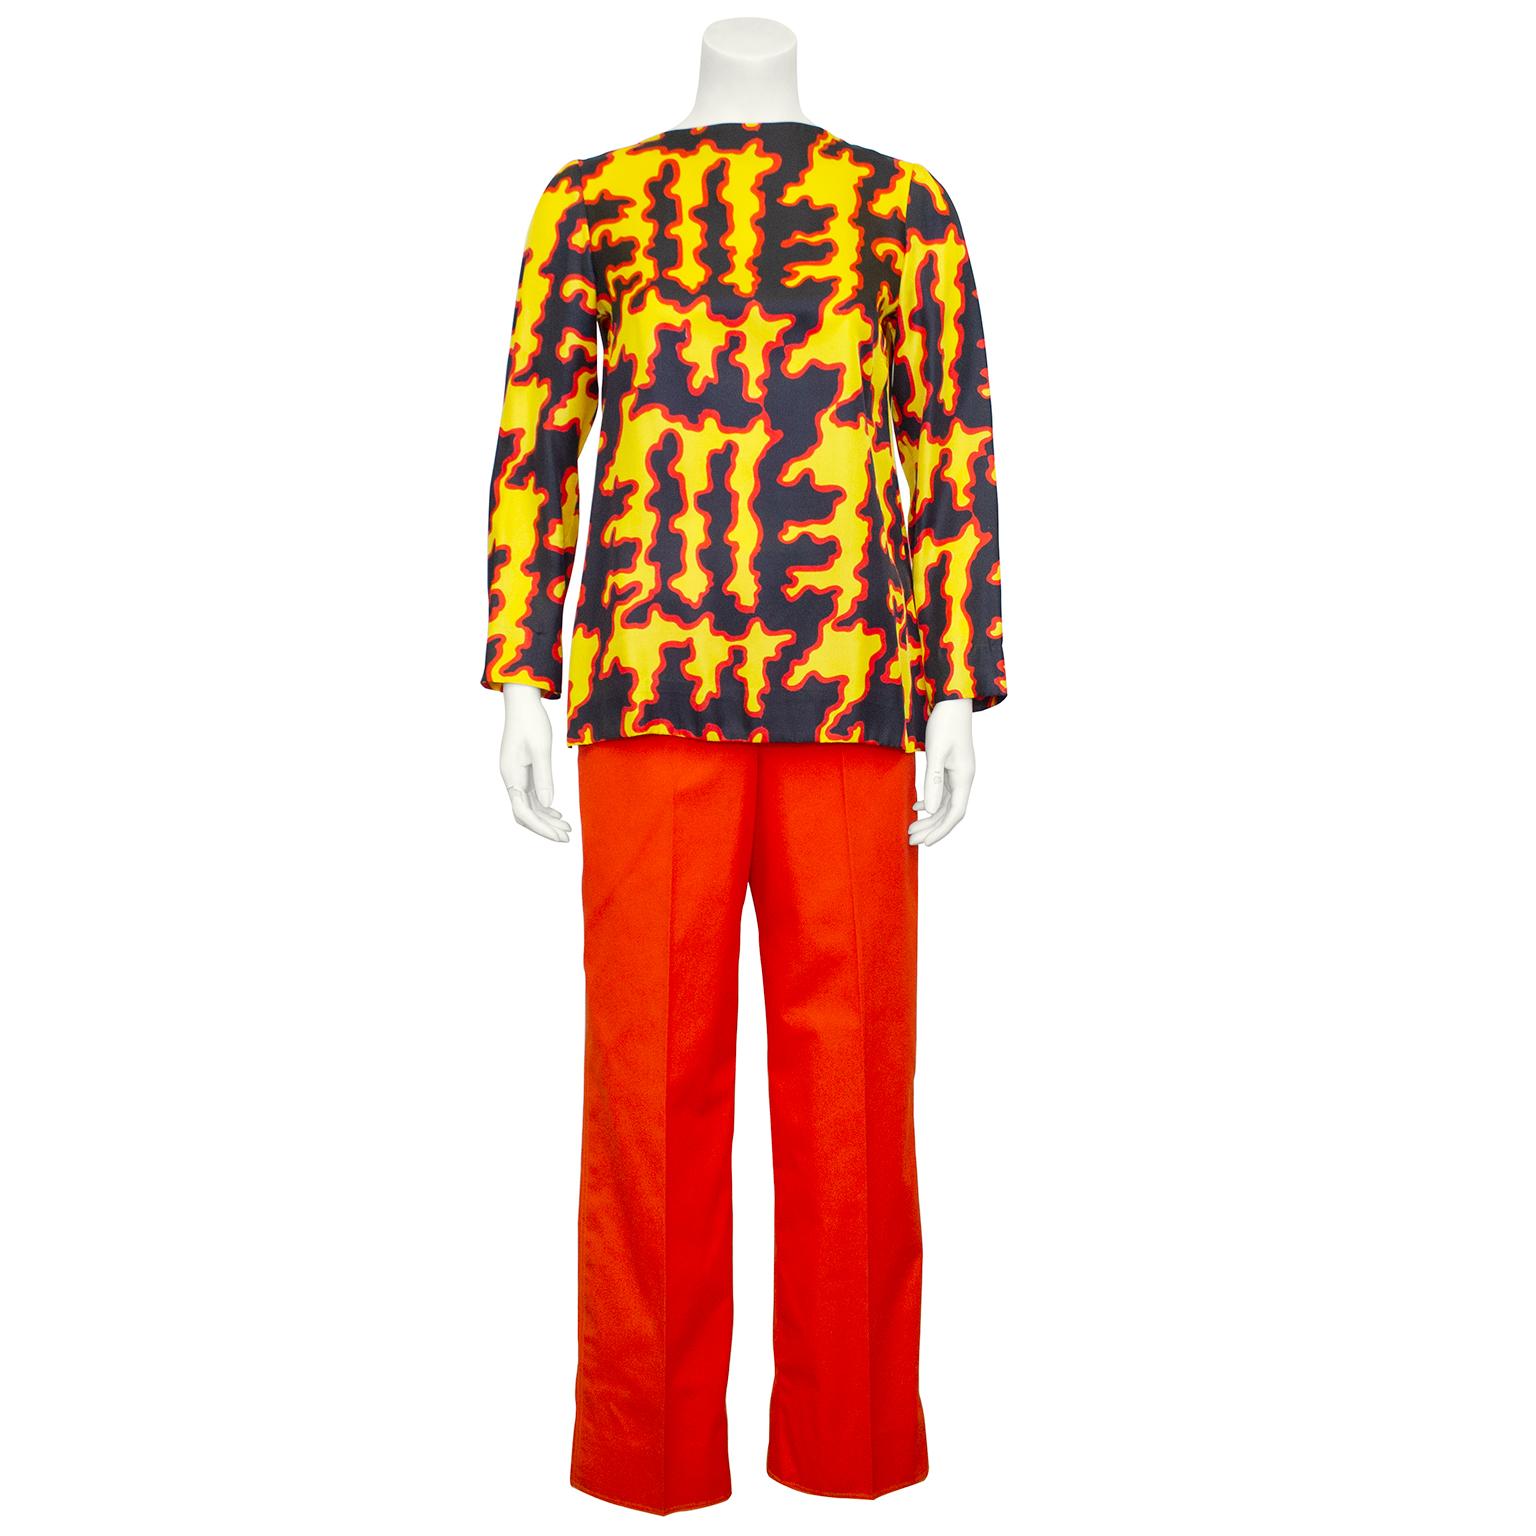 Fabulous Donald Brooks three piece ensemble from the early 1970s. Features matching fiery orange cotton jacket and trousers with silk top. Jacket has a rounded notched collar, gold metal buttons and rounded diagonal patch pockets at bust. Shirt is